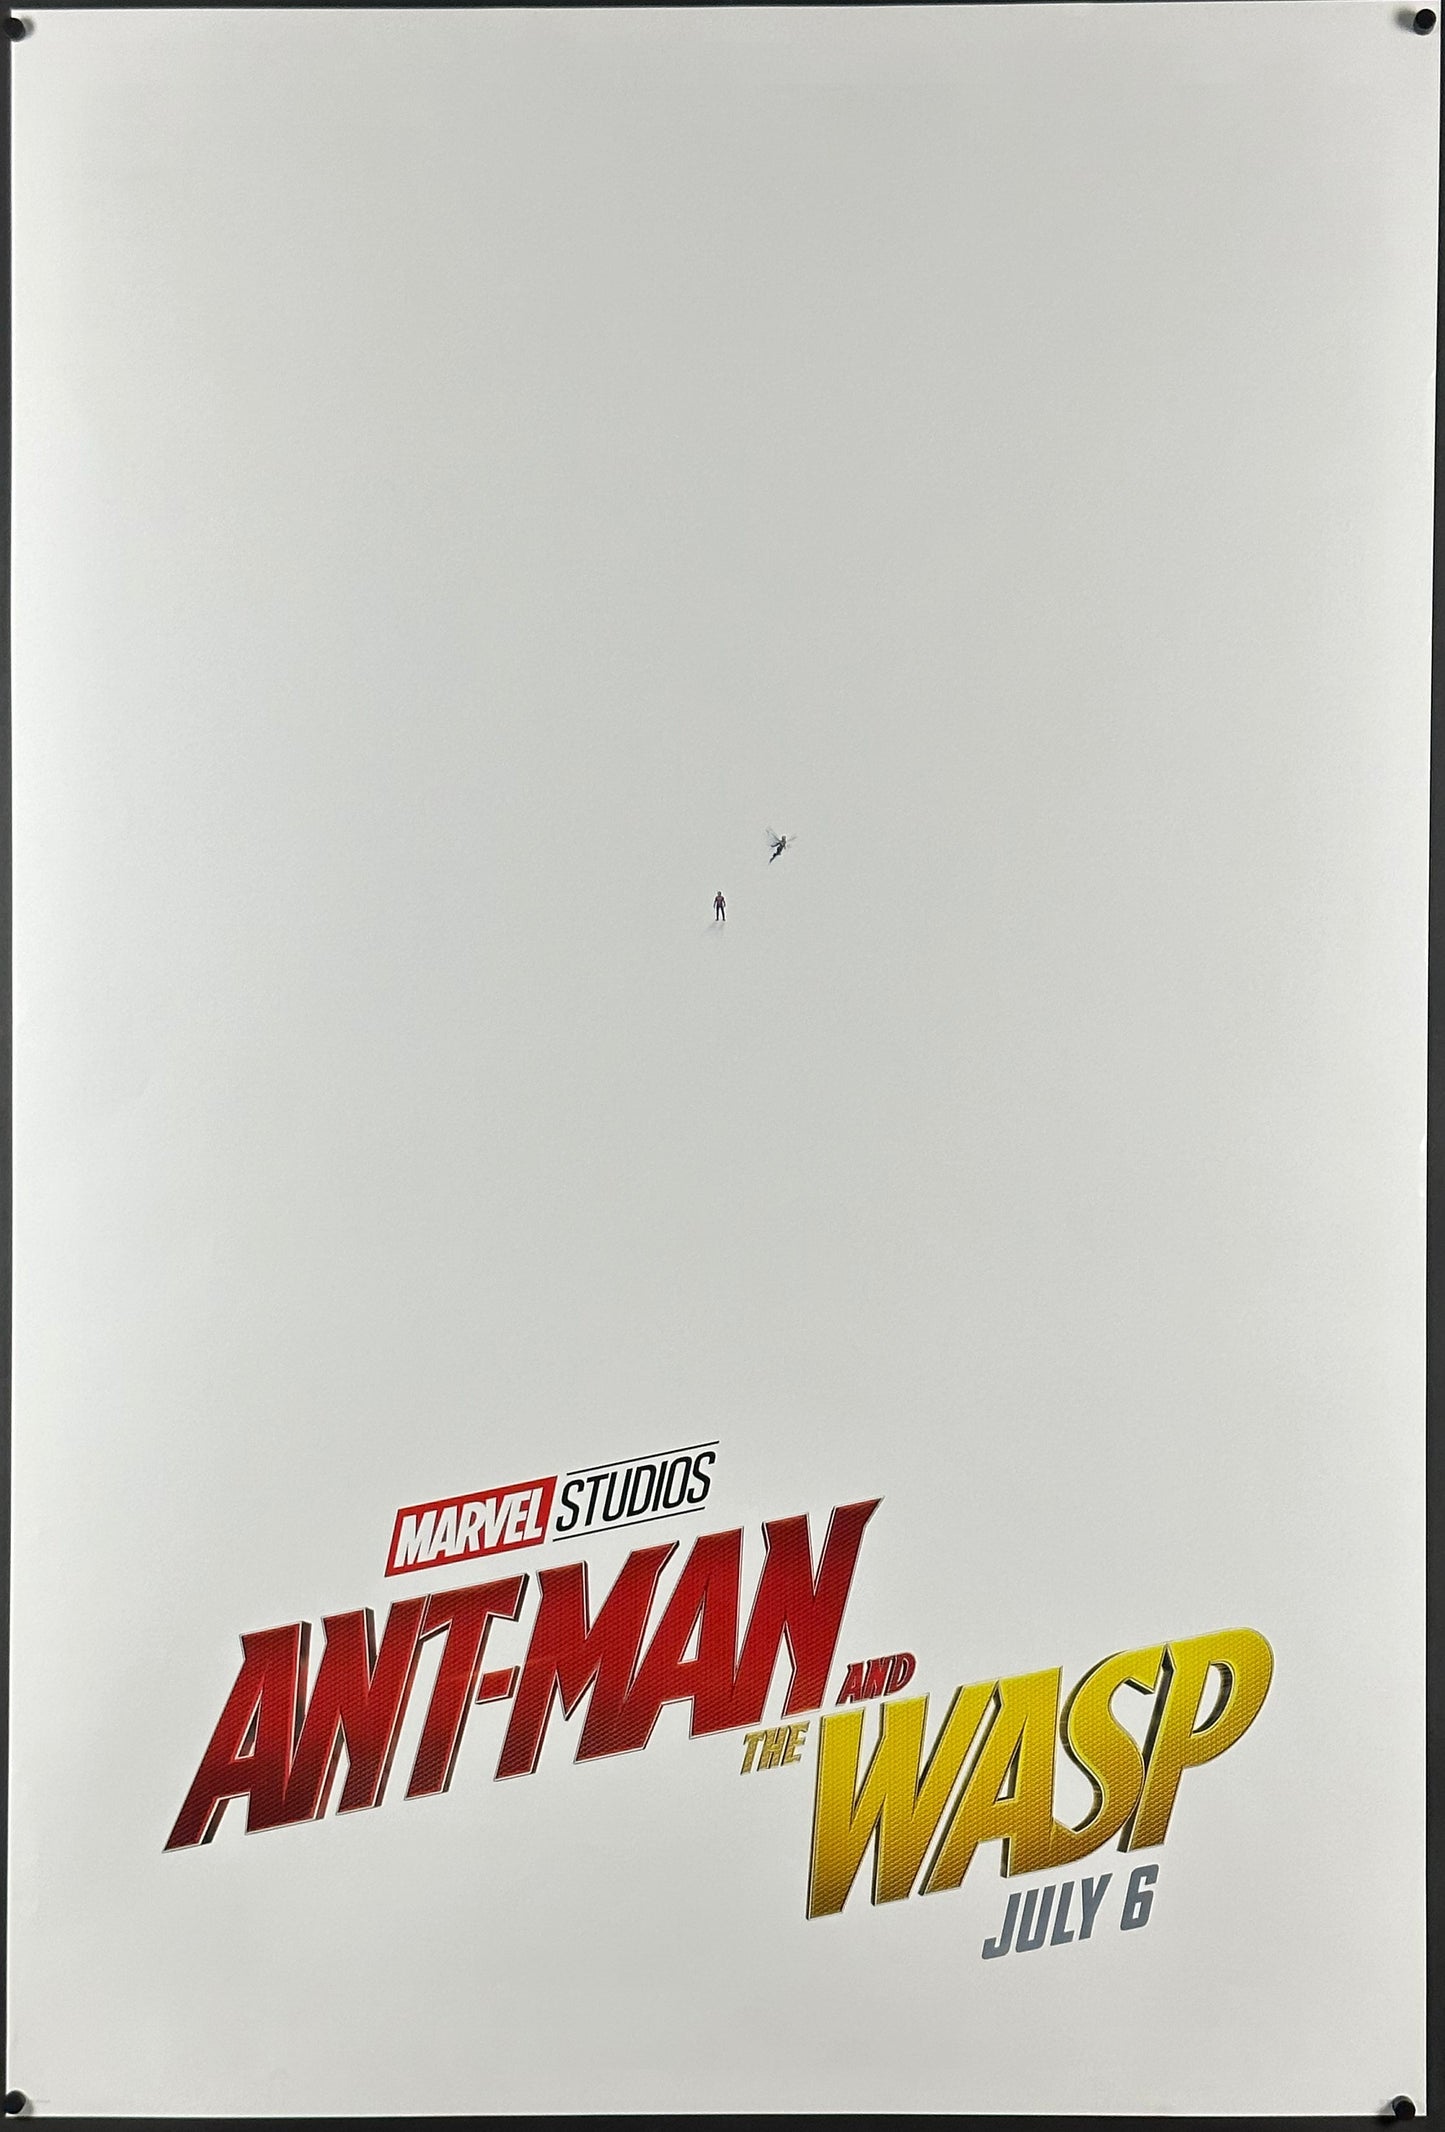 Ant-Man And The Wasp US One Sheet Teaser Style (2018) - ORIGINAL RELEASE - posterpalace.com